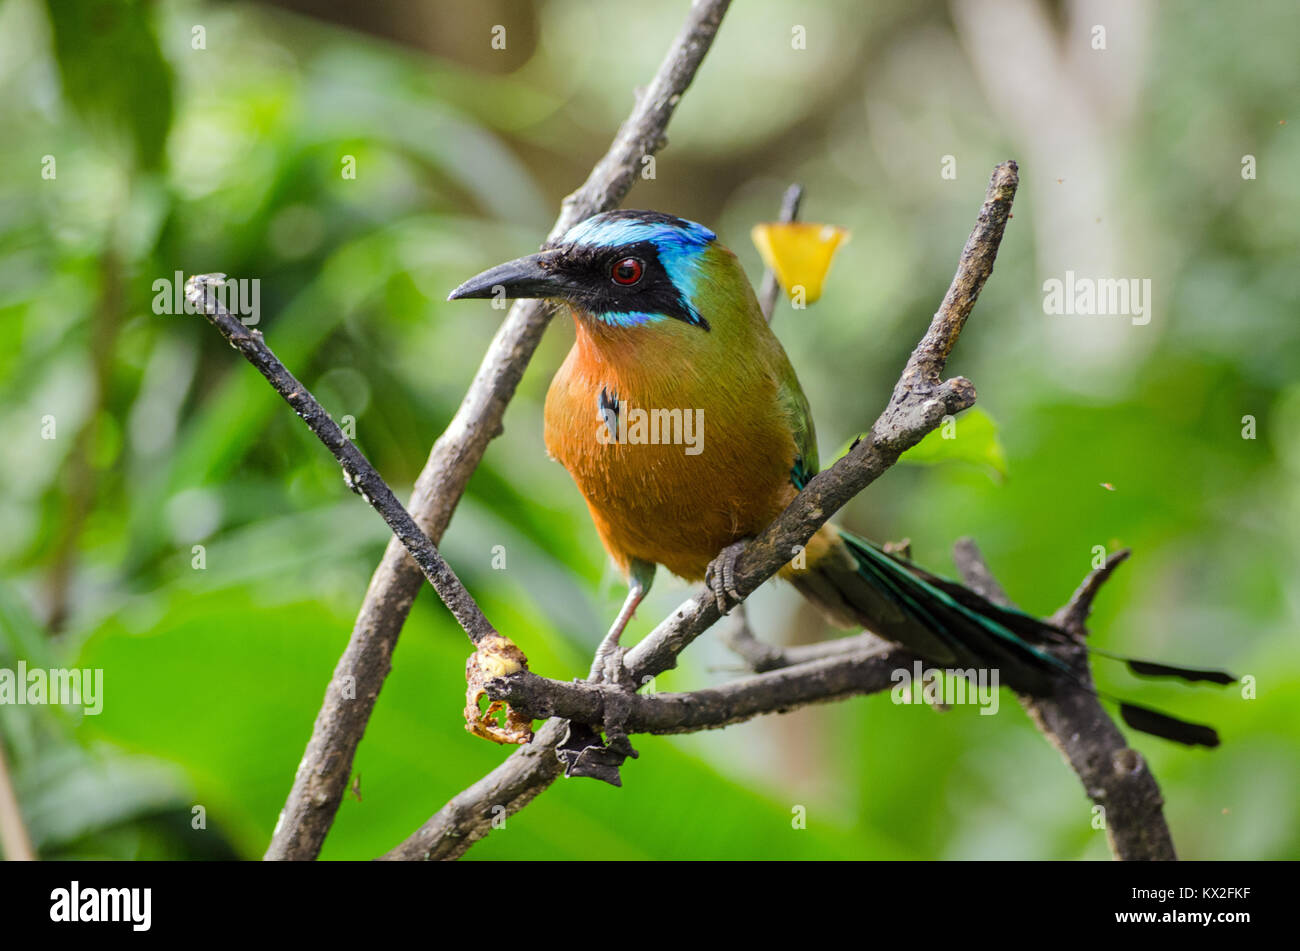 View of a spectacular blue crowned mot mot bird perched on a tree in Tobago.  The bird, latin name Momotus momota, is very popular in the island natio Stock Photo